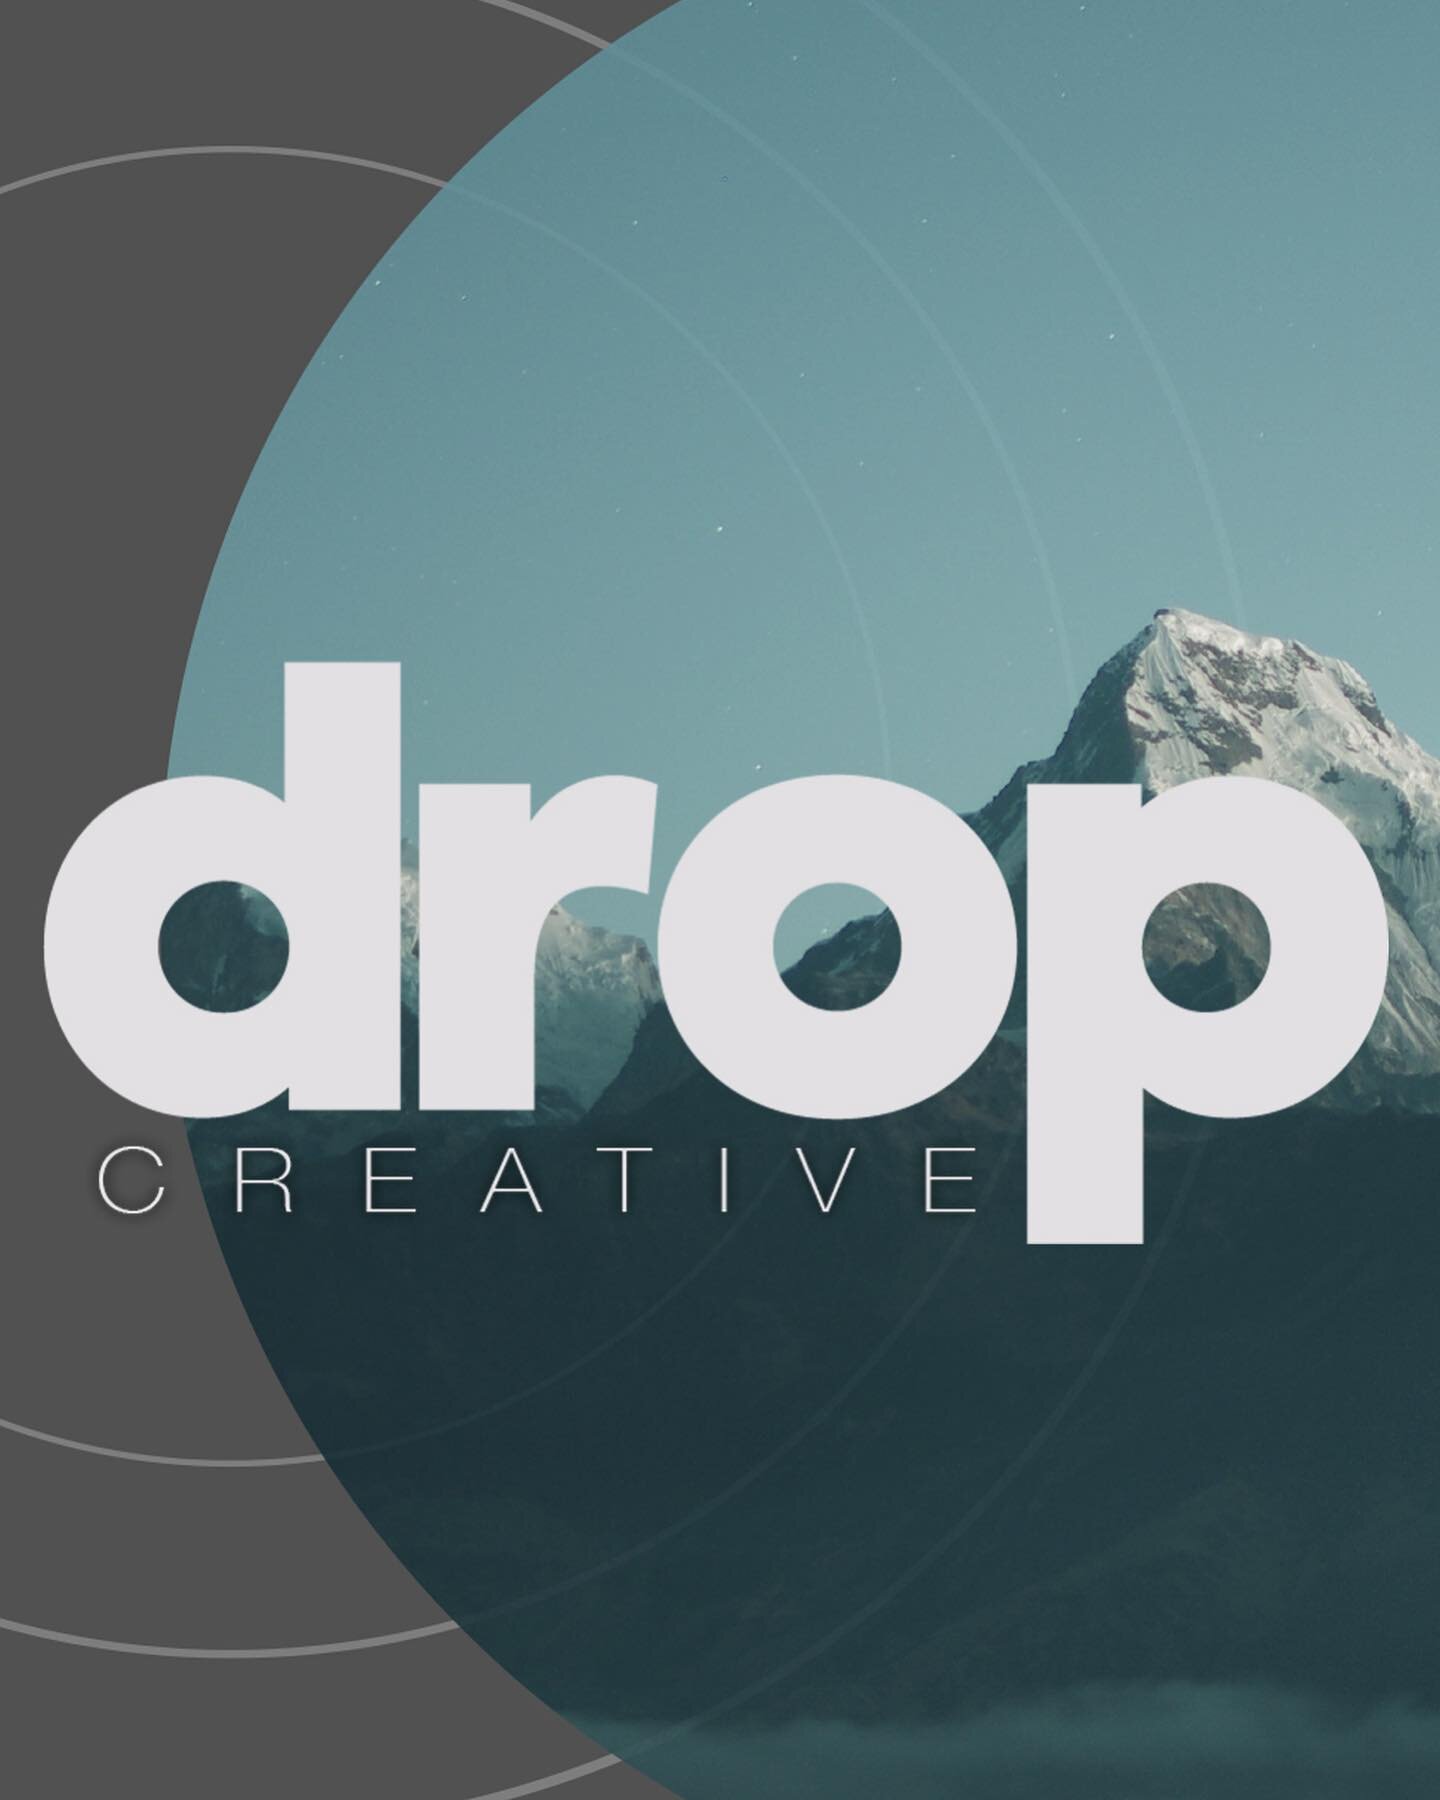 | Drop Creative |
Tslc Productions has changed the name to Drop Creative! Be expecting a lot more fun and interesting content!